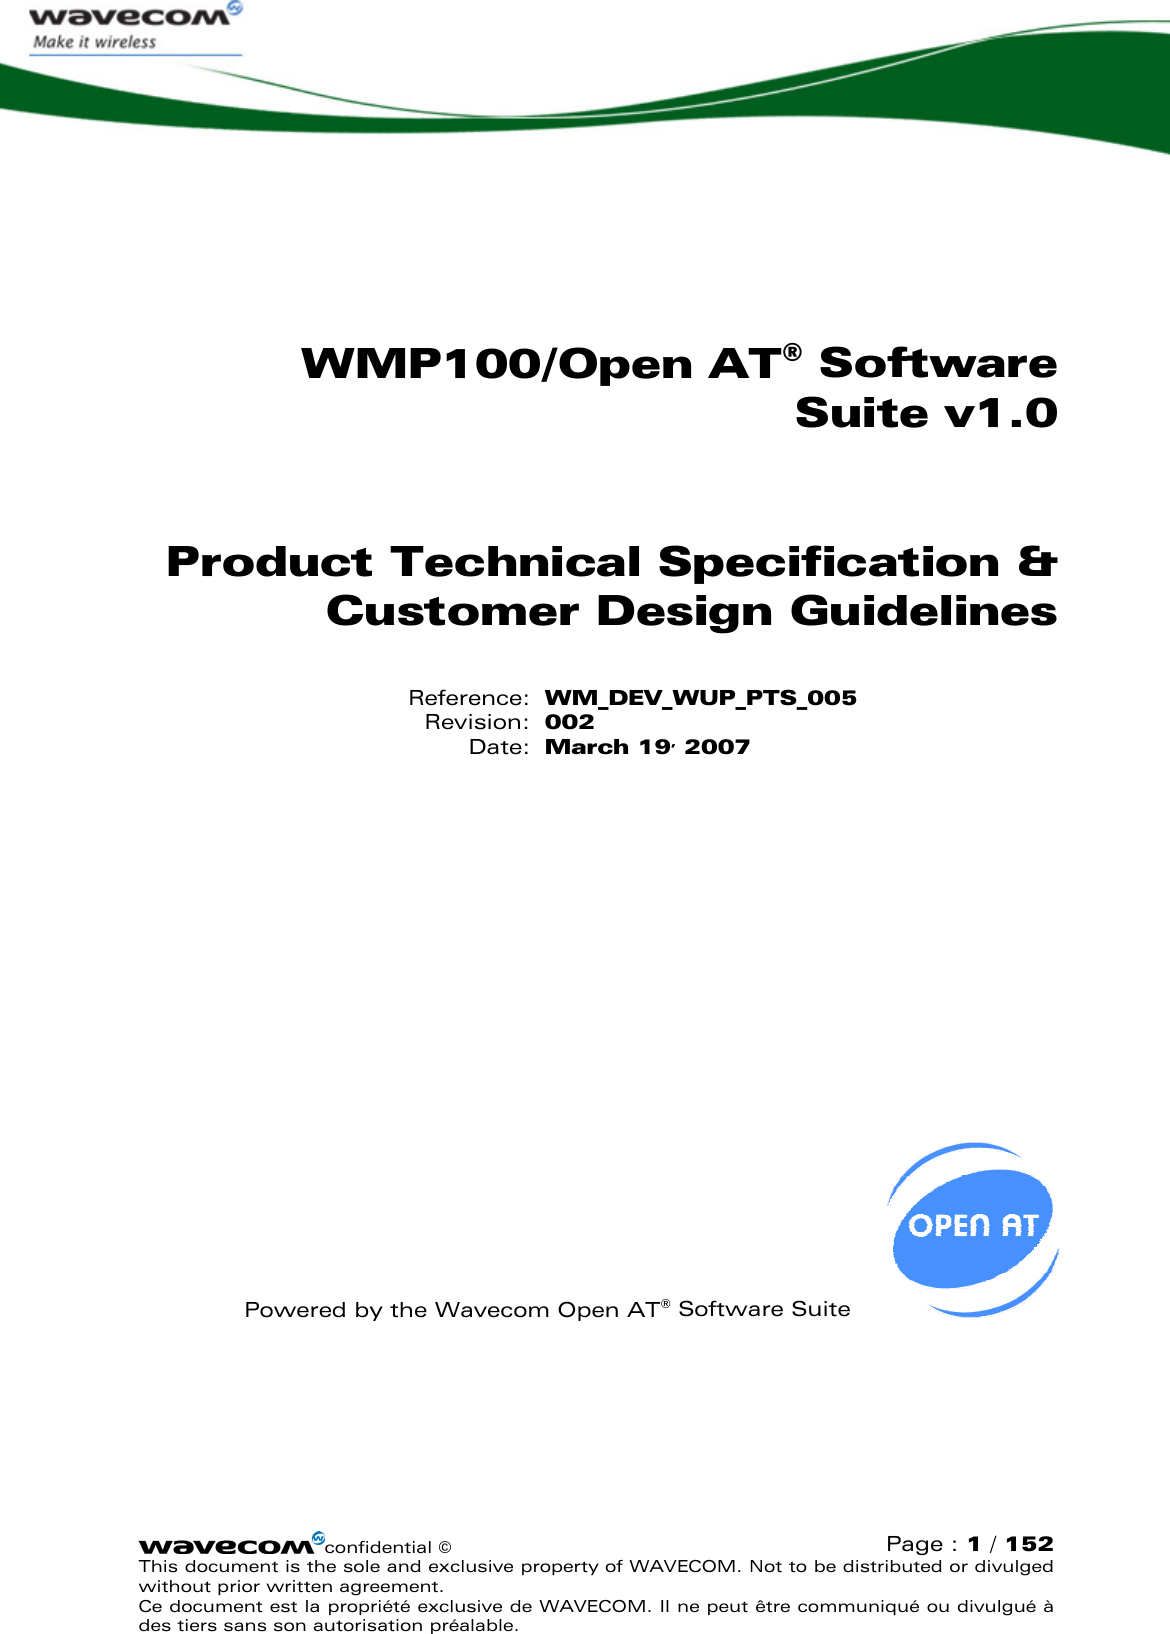   WMP100/Open AT® Software Suite v1.0 Product Technical Specification &amp; Customer Design Guidelines Reference: WM_DEV_WUP_PTS_005 Revision: 002 Date: March 19, 2007            Powered by the Wavecom Open AT® Software Suite   confidential ©  Page : 1 / 152 This document is the sole and exclusive property of WAVECOM. Not to be distributed or divulged without prior written agreement.  Ce document est la propriété exclusive de WAVECOM. Il ne peut être communiqué ou divulgué à des tiers sans son autorisation préalable.  